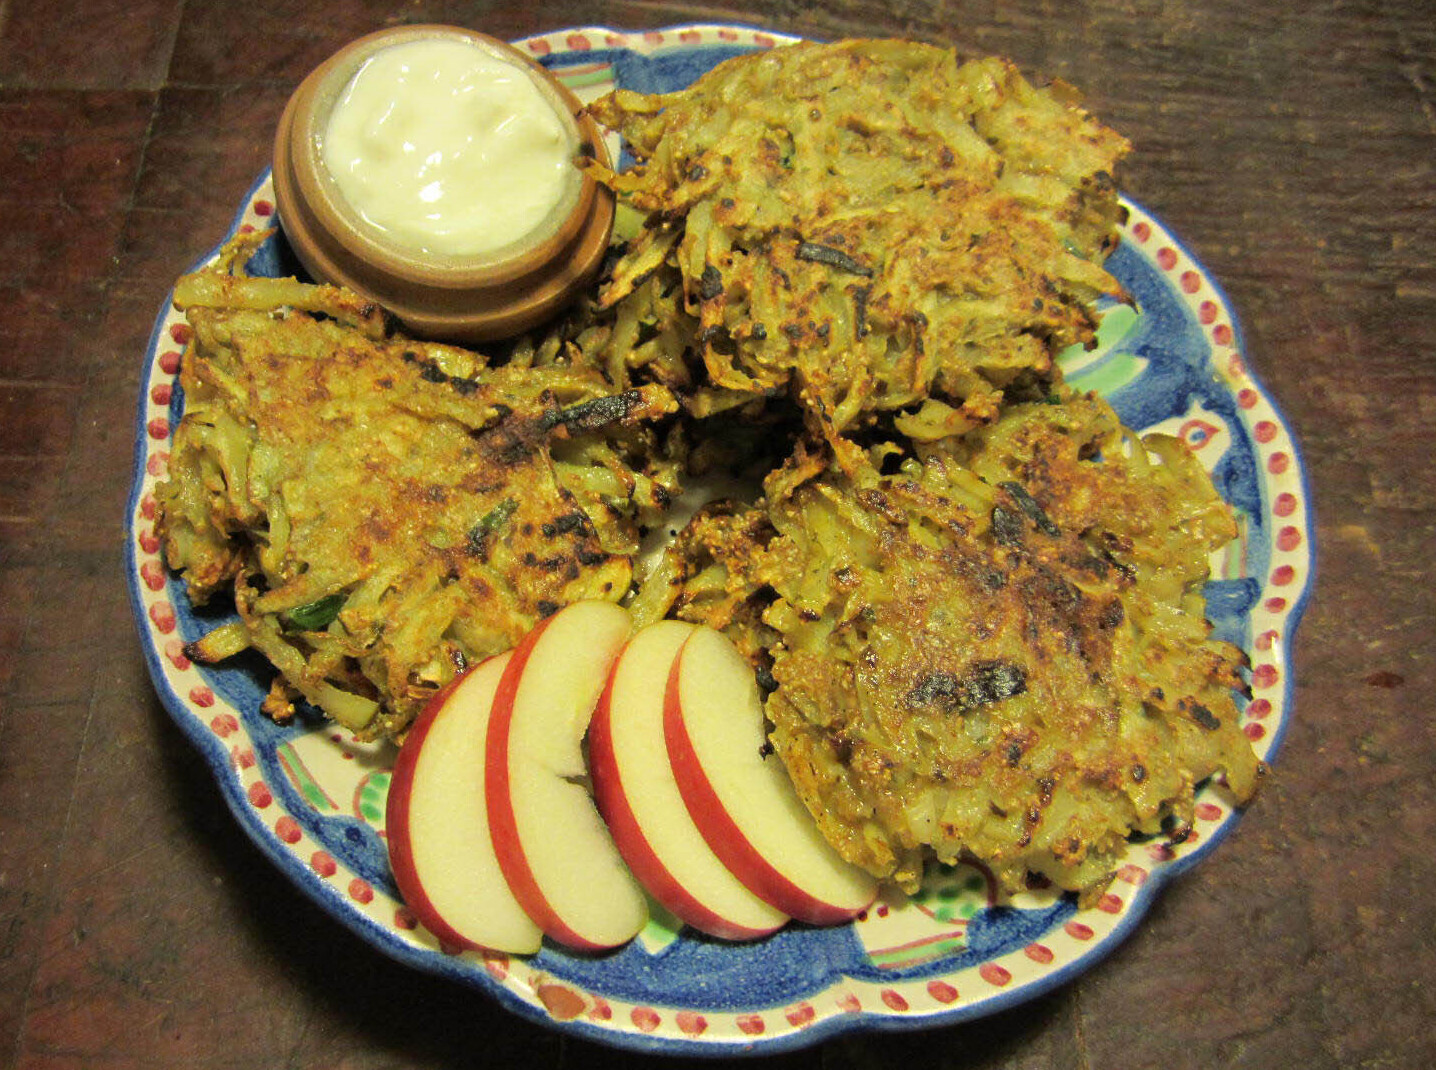 Potato chive pancakes with sliced apples and plain yoghurt